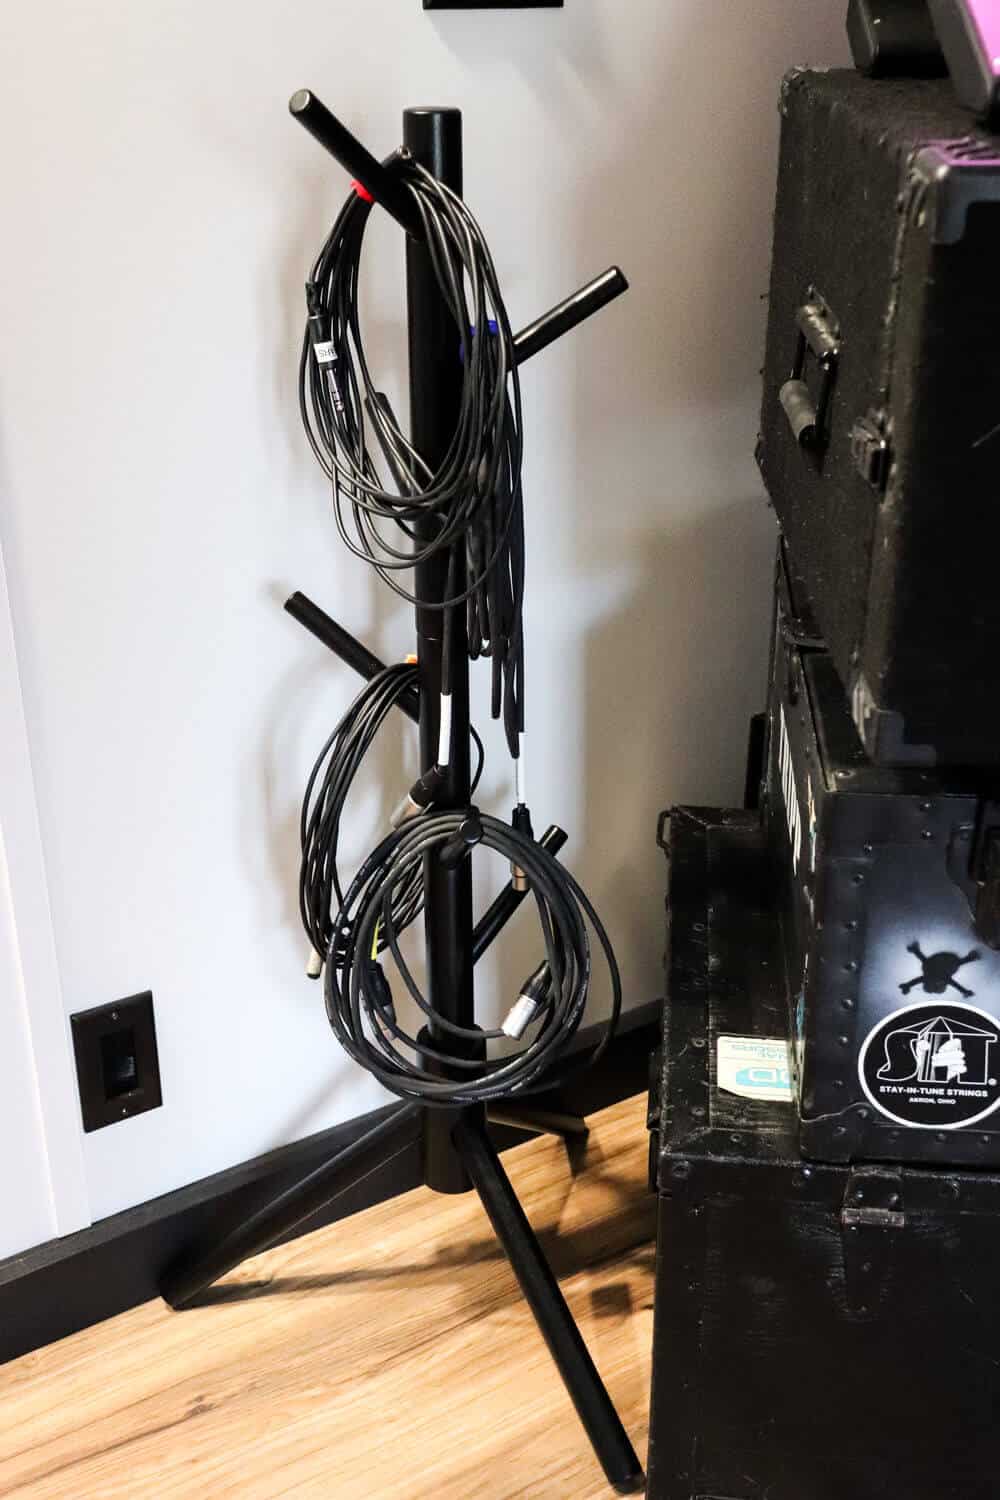 using a hat rack as a cord organizer